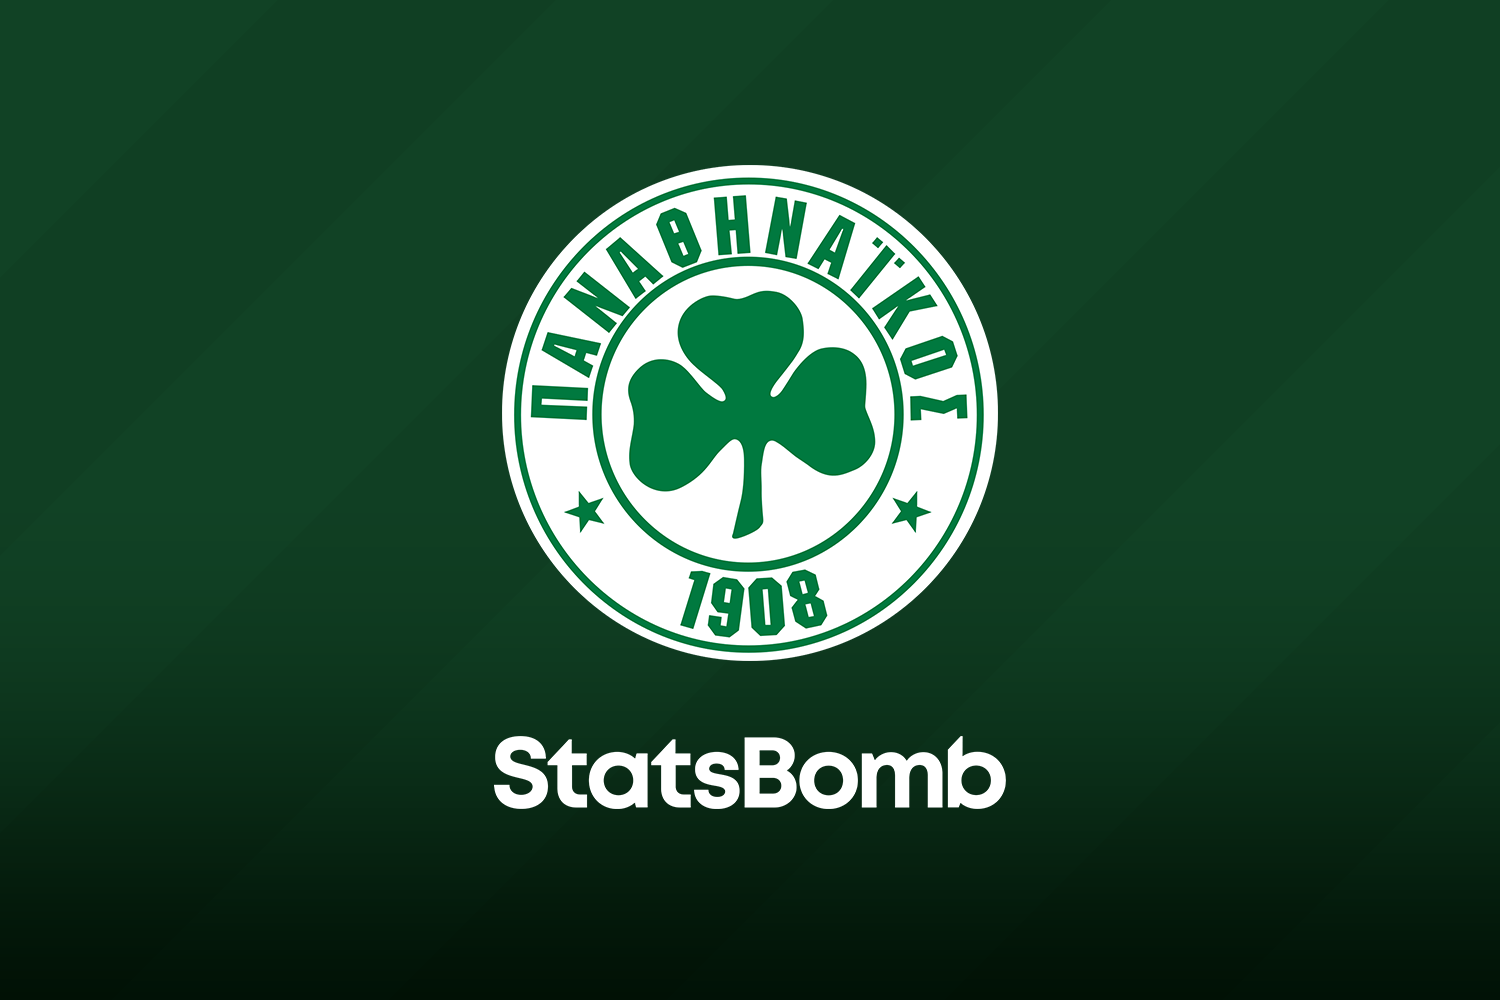 StatsBomb Strengthen Presence In The Greek Market With Panathinaikos FC Agreement